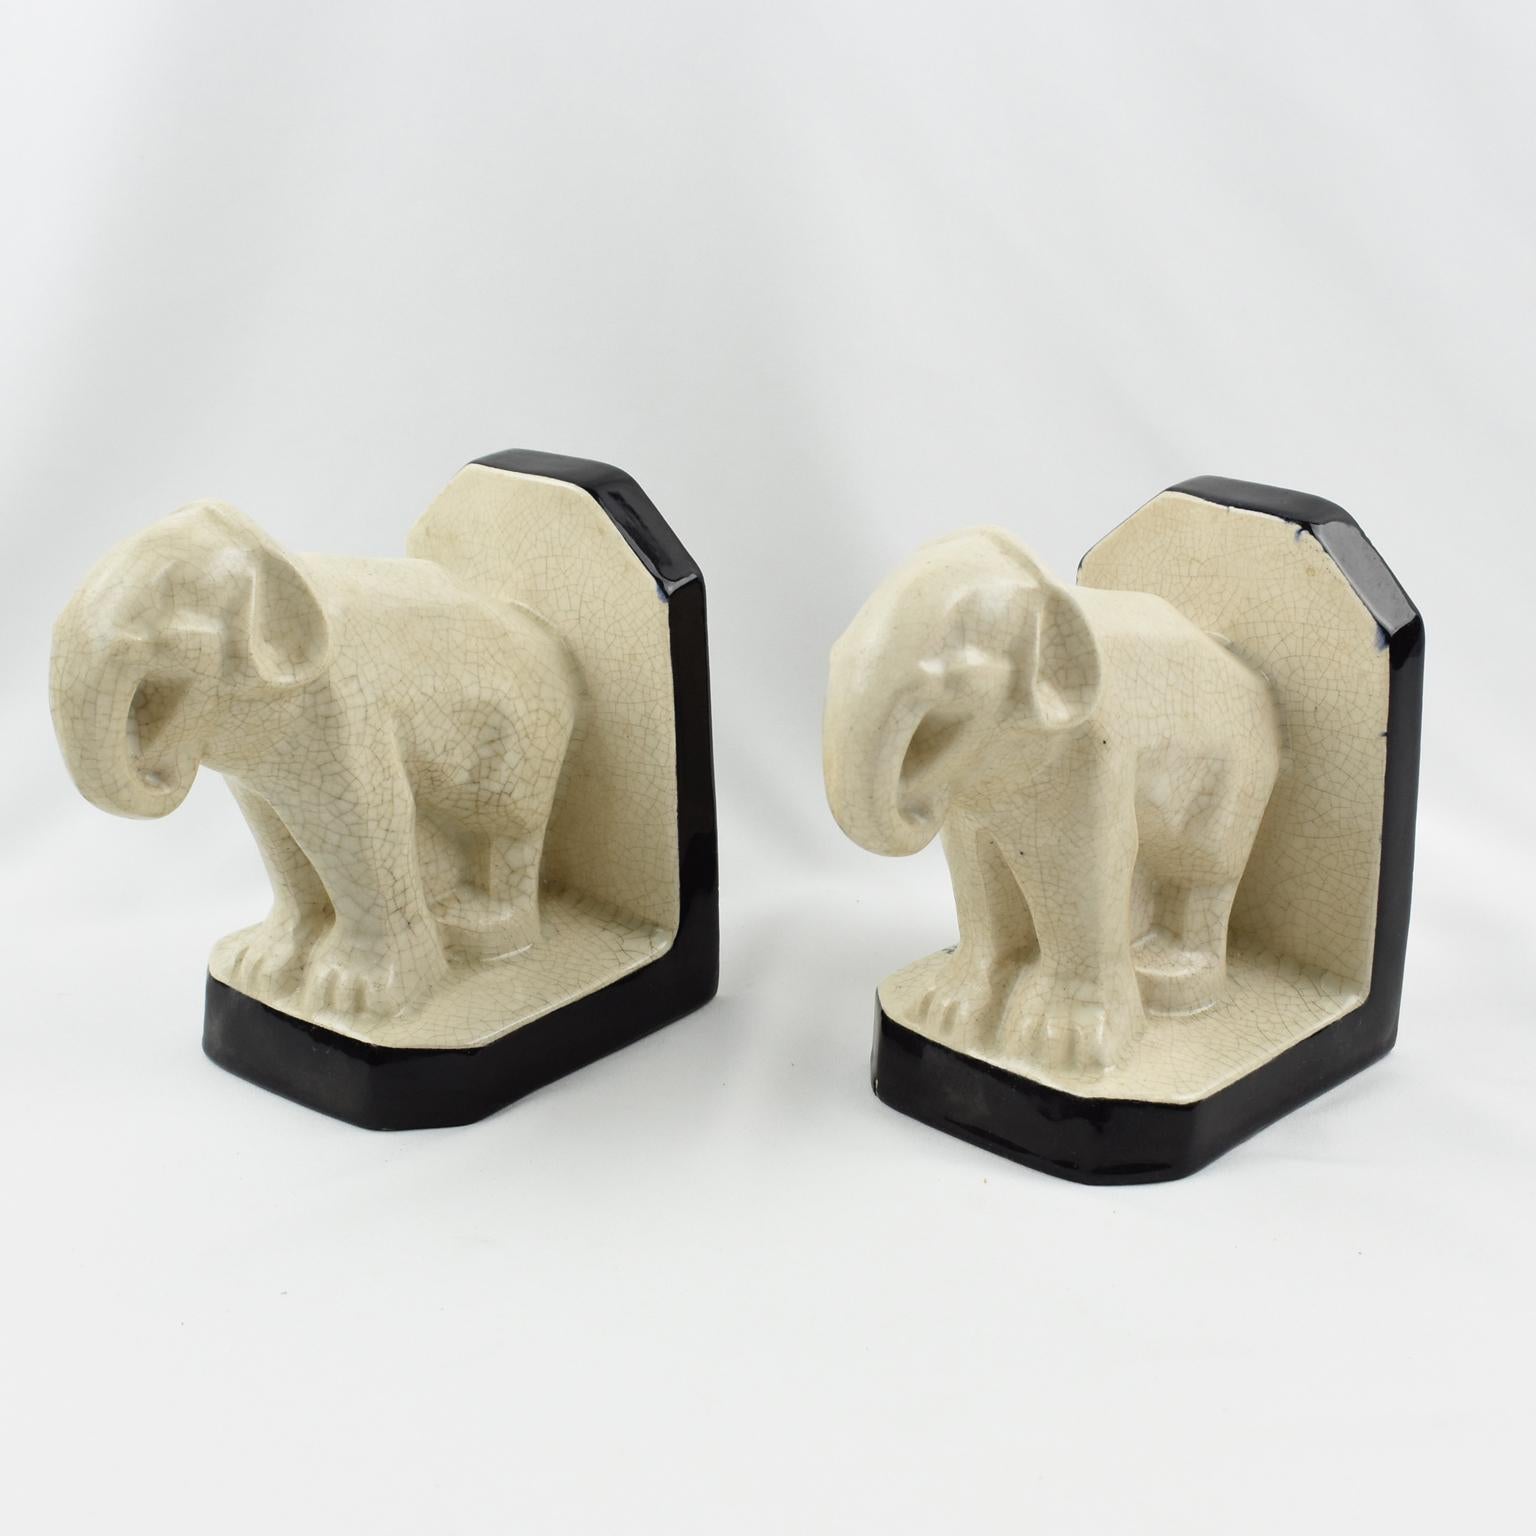 This superb Art Deco pair of crackled ceramic bookends was designed and crafted by Le Moine, France, in the 1930s. The off-white colored crackle glaze ceramic or faience sculpture features a pair of elephants with contrasted black enameled glaze